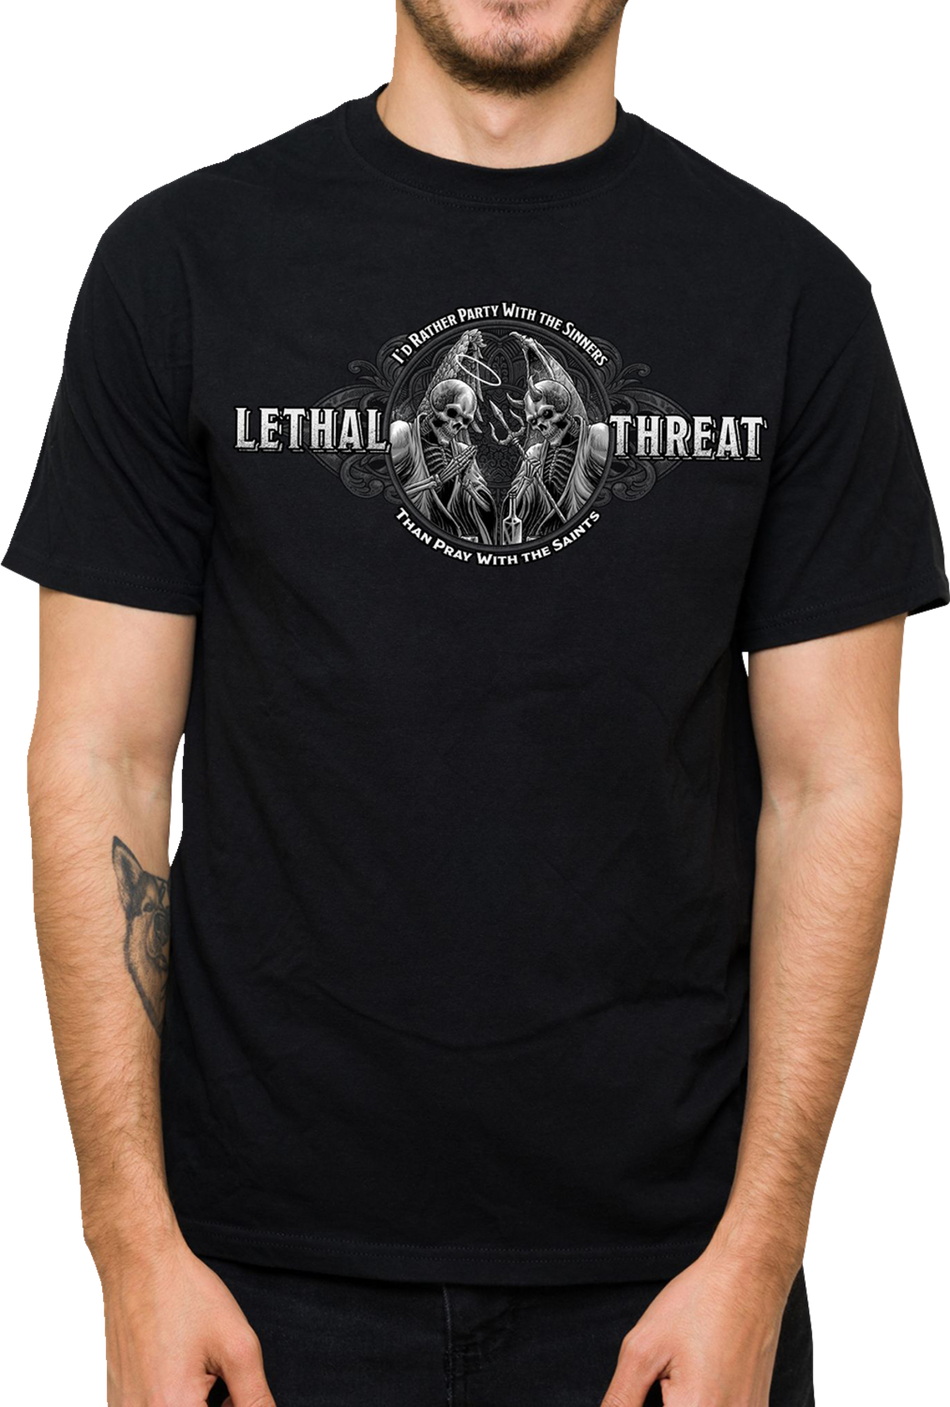 LETHAL THREAT Party with the Sinners T-Shirt - Black - 5XL LT20905-5XL